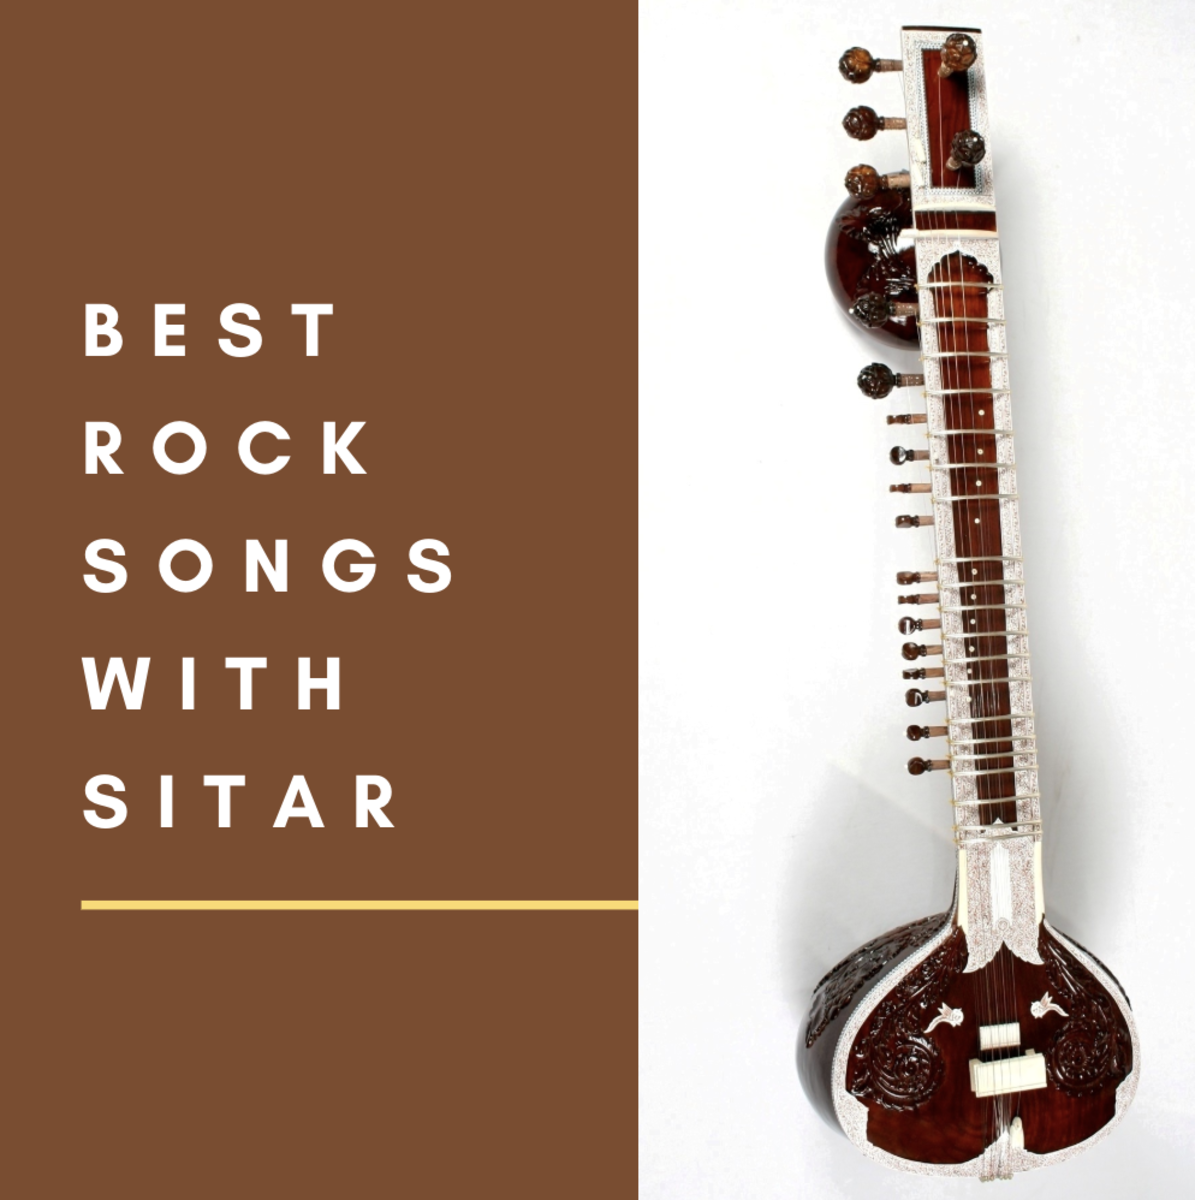 Read on to uncover the top rocks songs that feature the sitar.